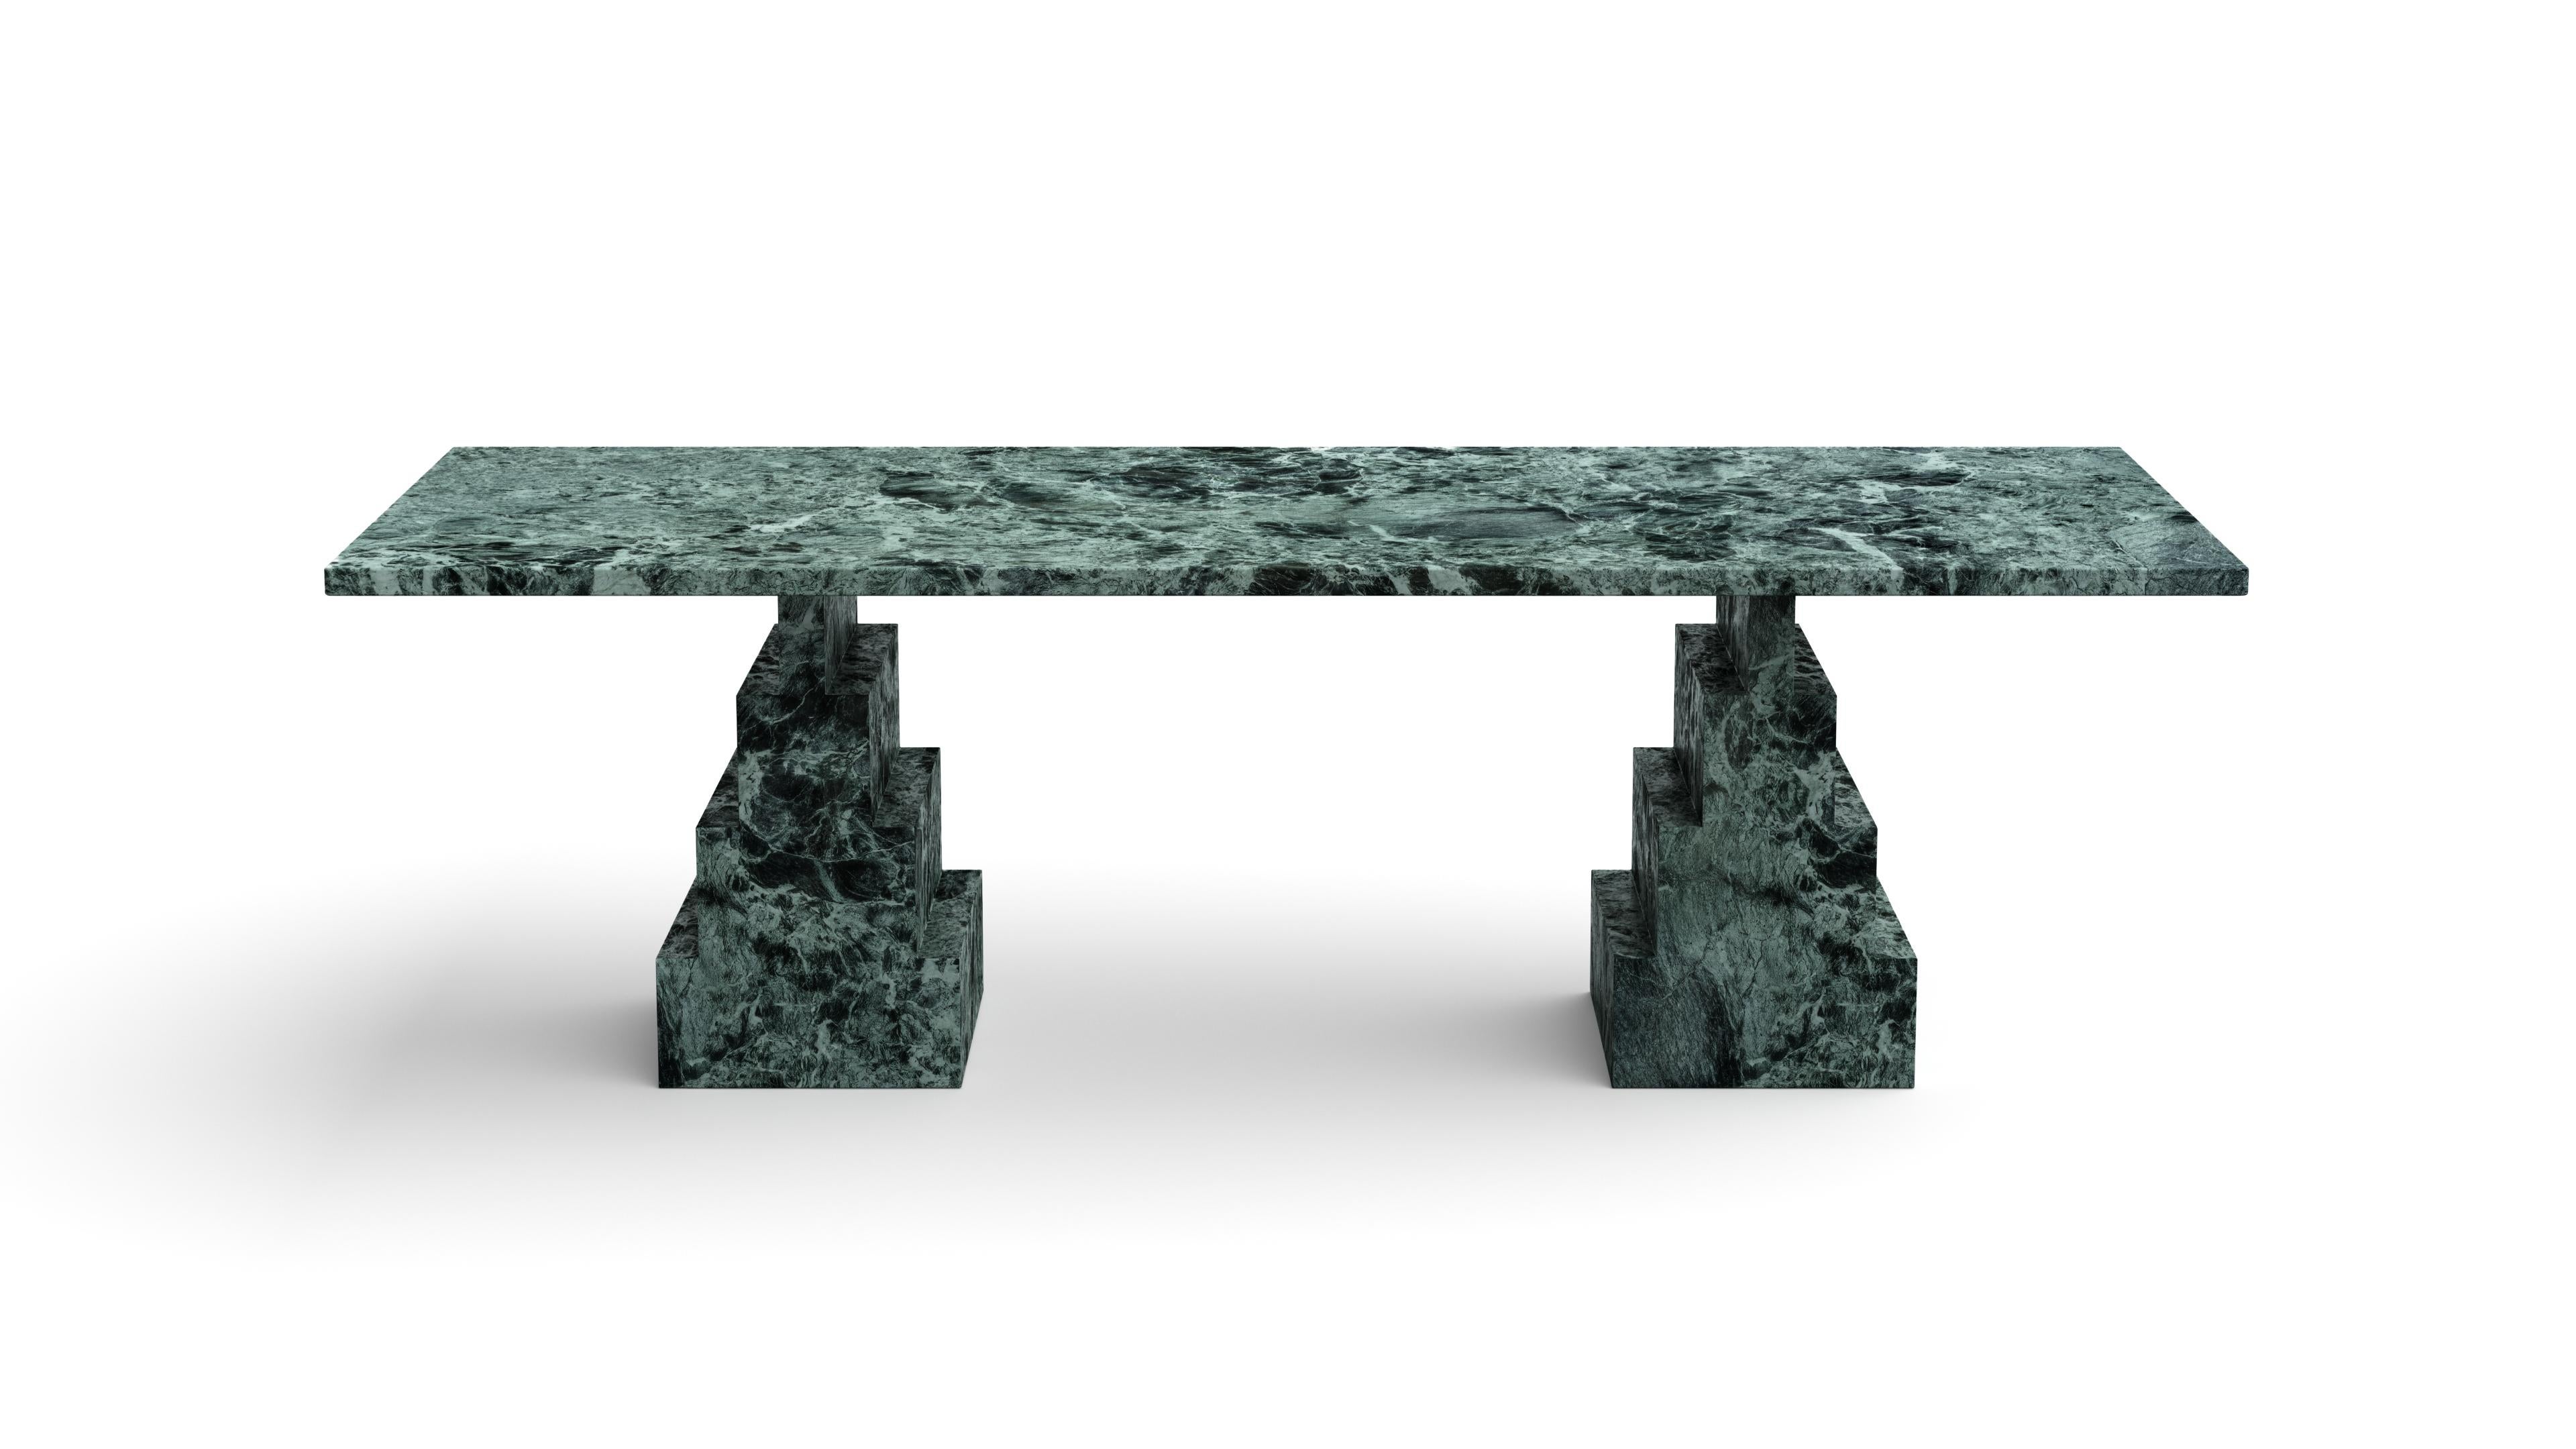 𝗣𝗿𝗼𝗱𝘂𝗰𝘁 𝗗𝗲𝘁𝗮𝗶𝗹𝘀:
The NIKO series has sophisticated and sculptural aesthetics for any room with its characteristic legs. The beautiful cross between solid pieces and a balancing top. 

The NIKO might be understated and sophisticated,